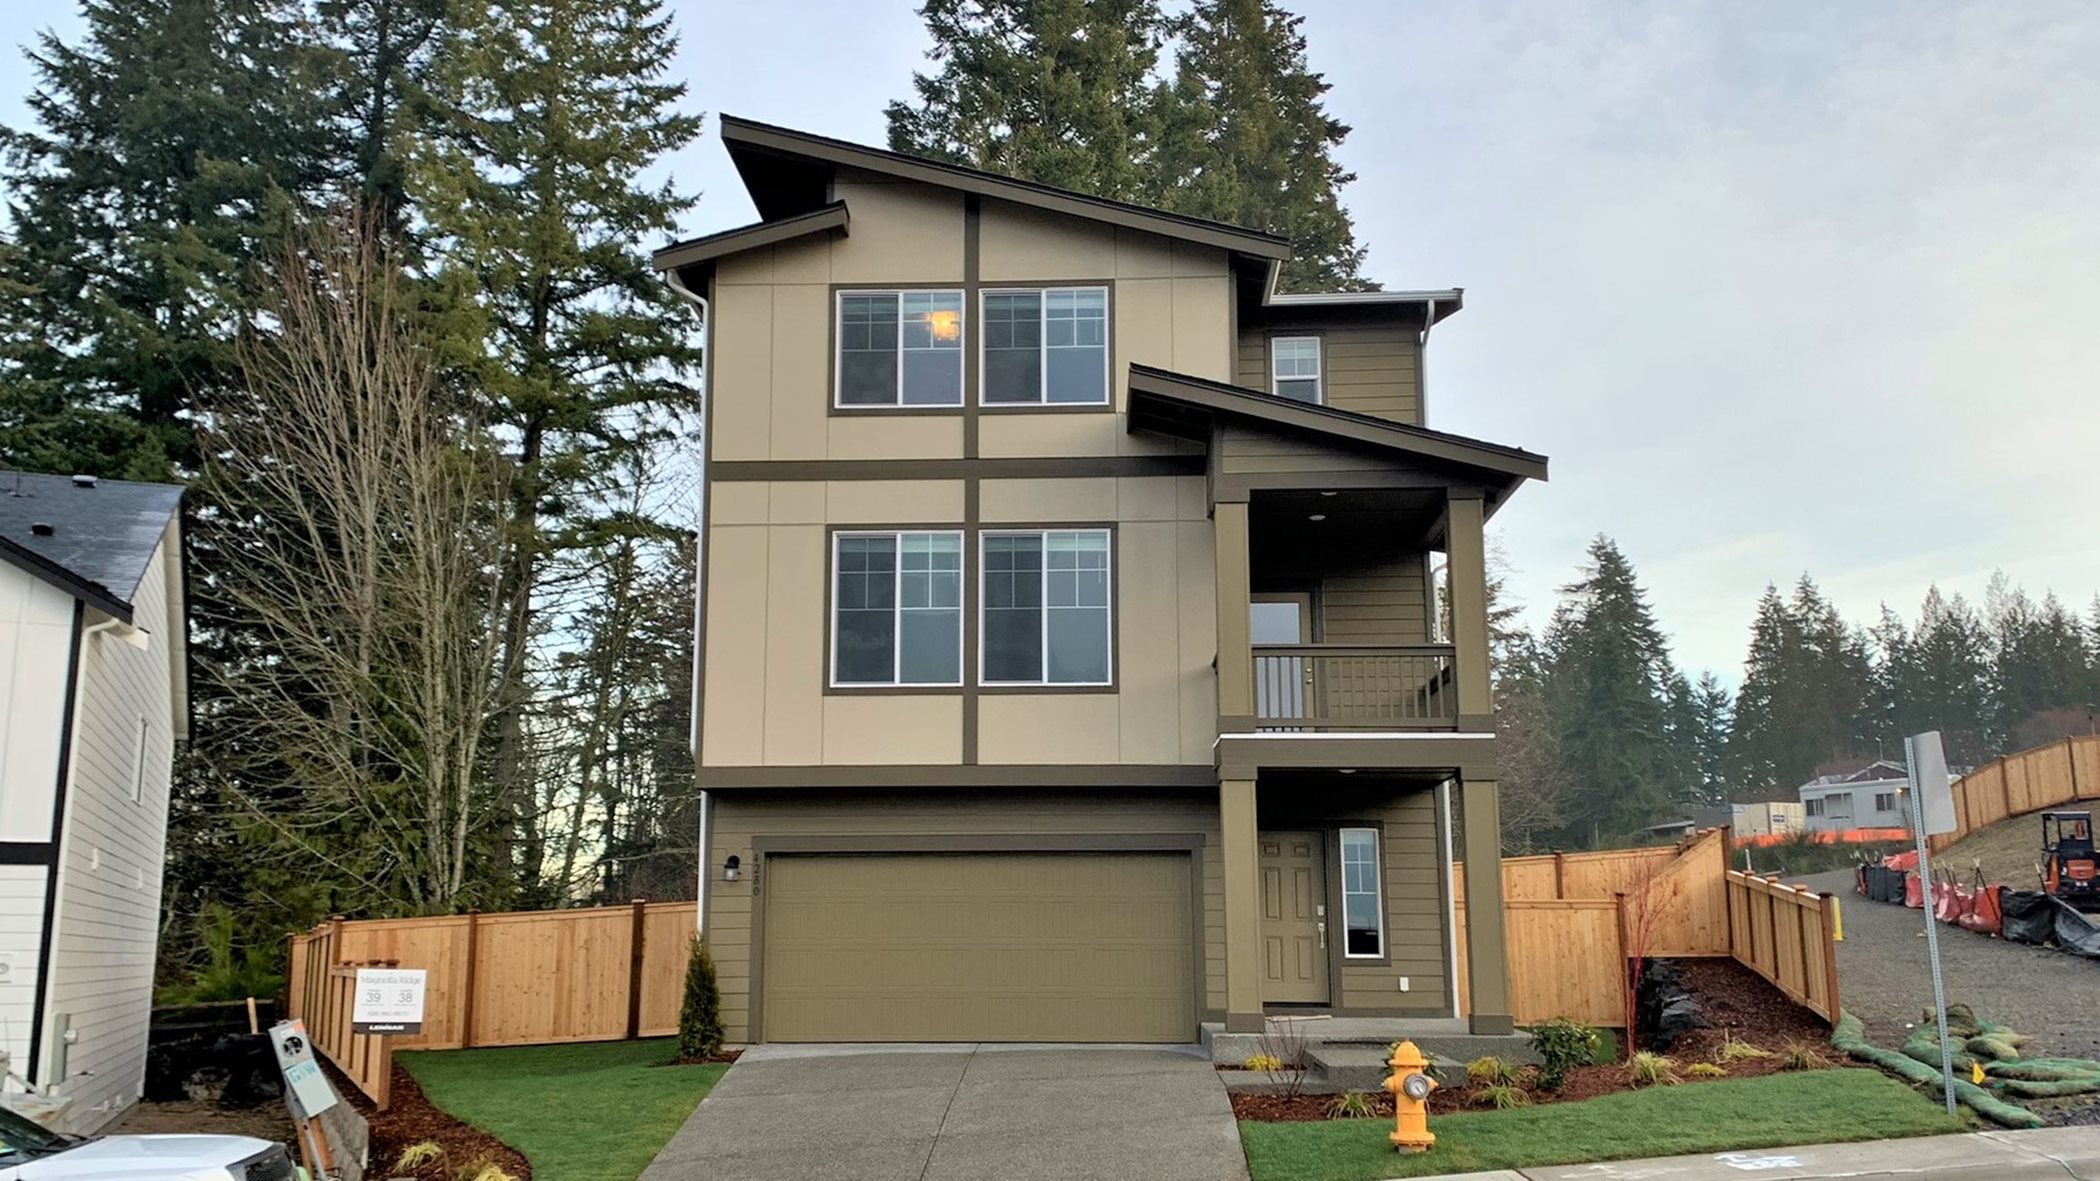 New homes for sale in Port Orchard WA